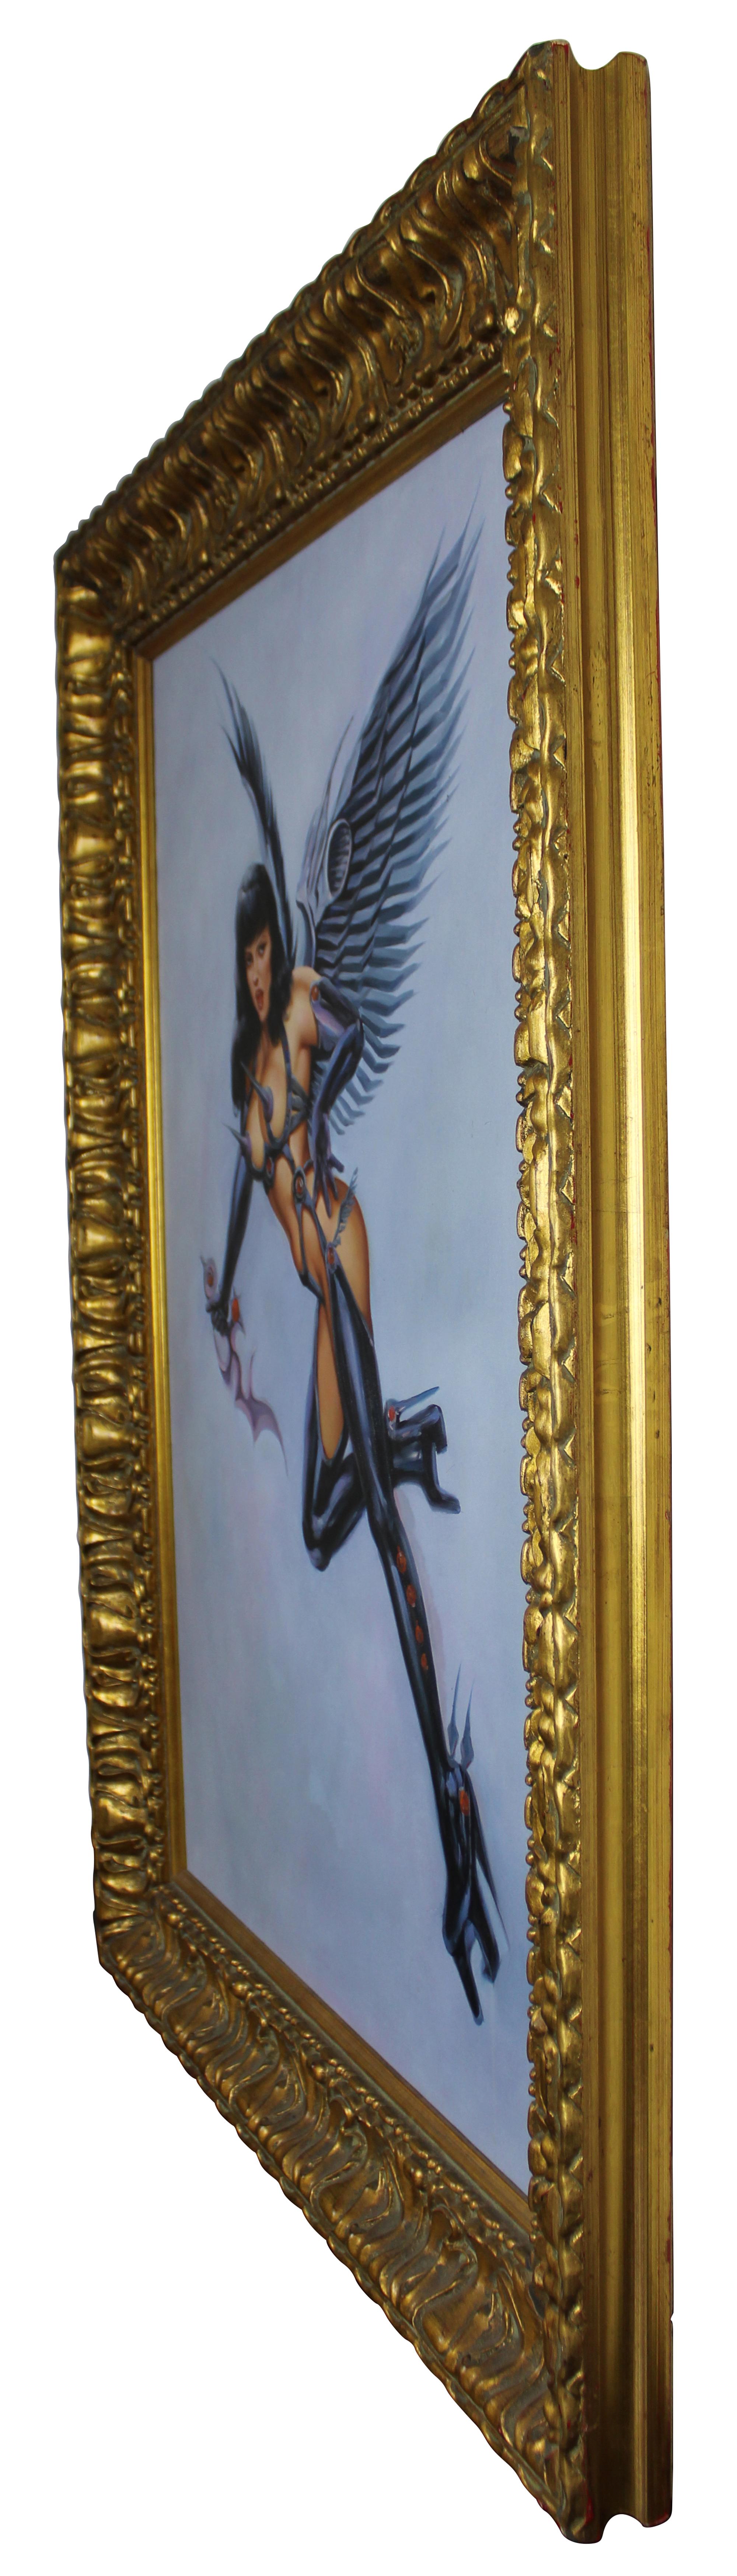 20th century erotic angel original oil painting. Features a woman scantily clad in latex armour holding a dagger. Unsigned. Framed in ornate gold. Measure: 44